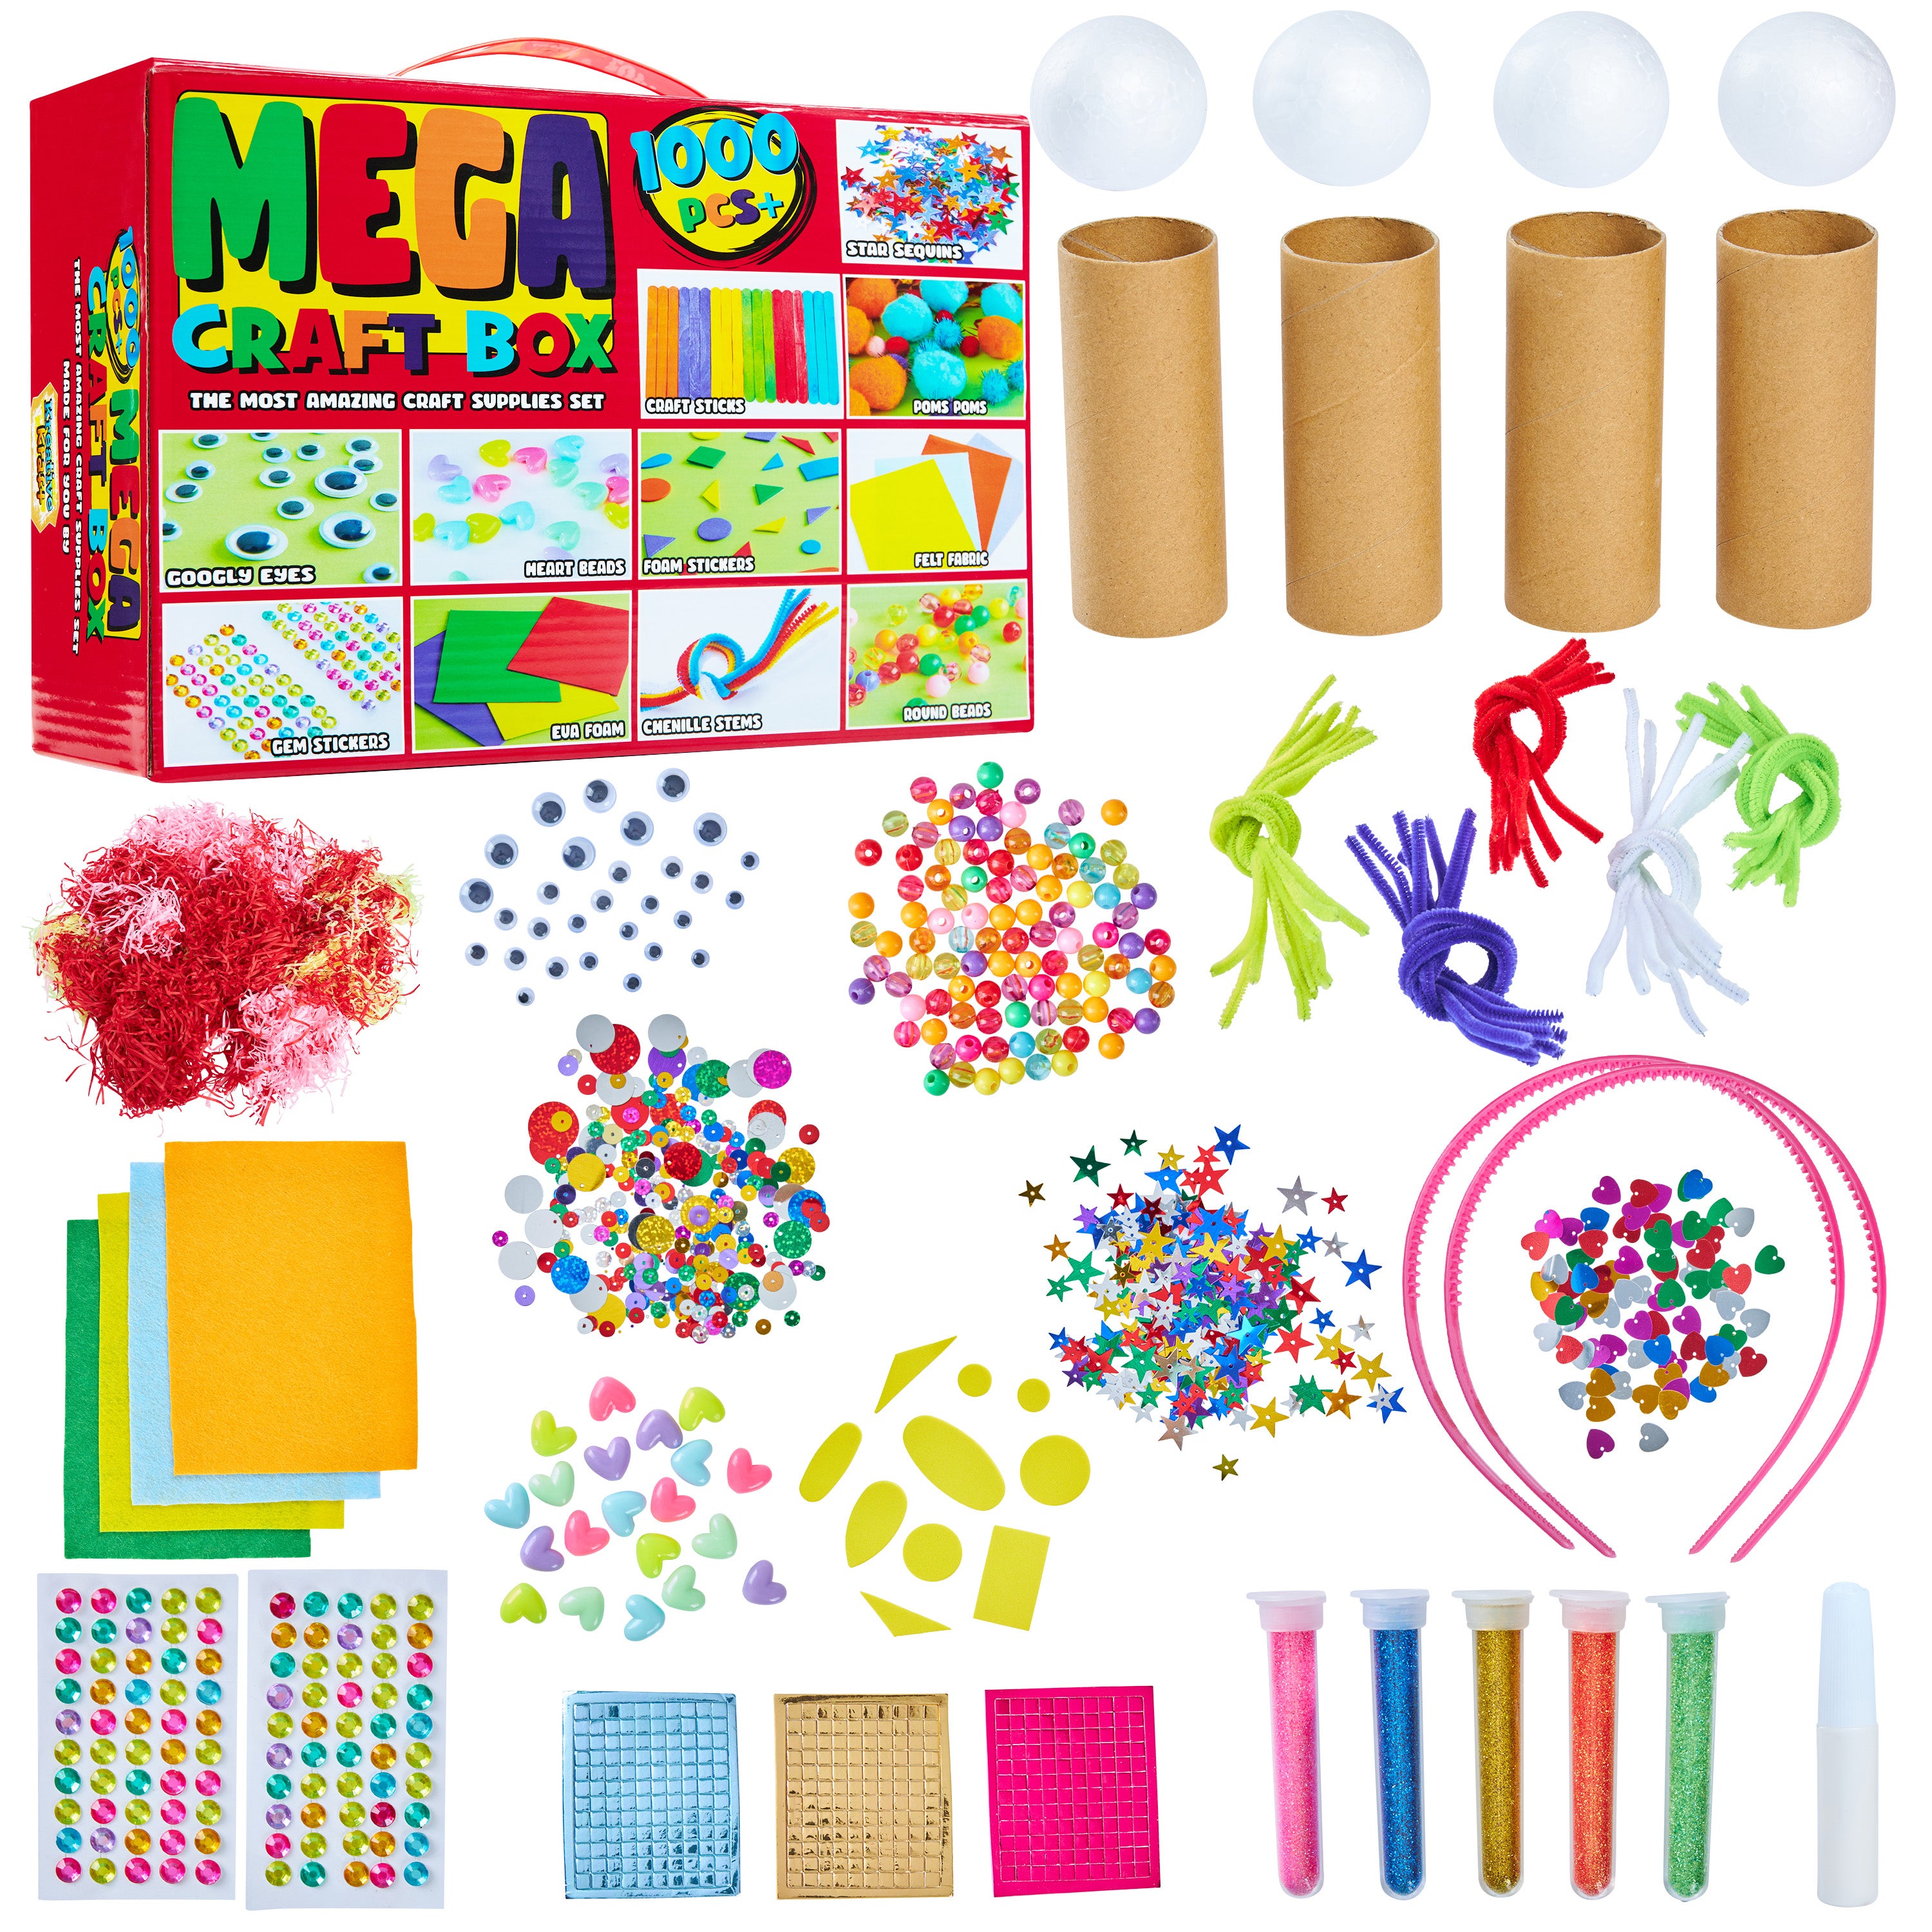 Arts and Crafts Supplies Set, Over 1000 pcs; Craft Box for Kids